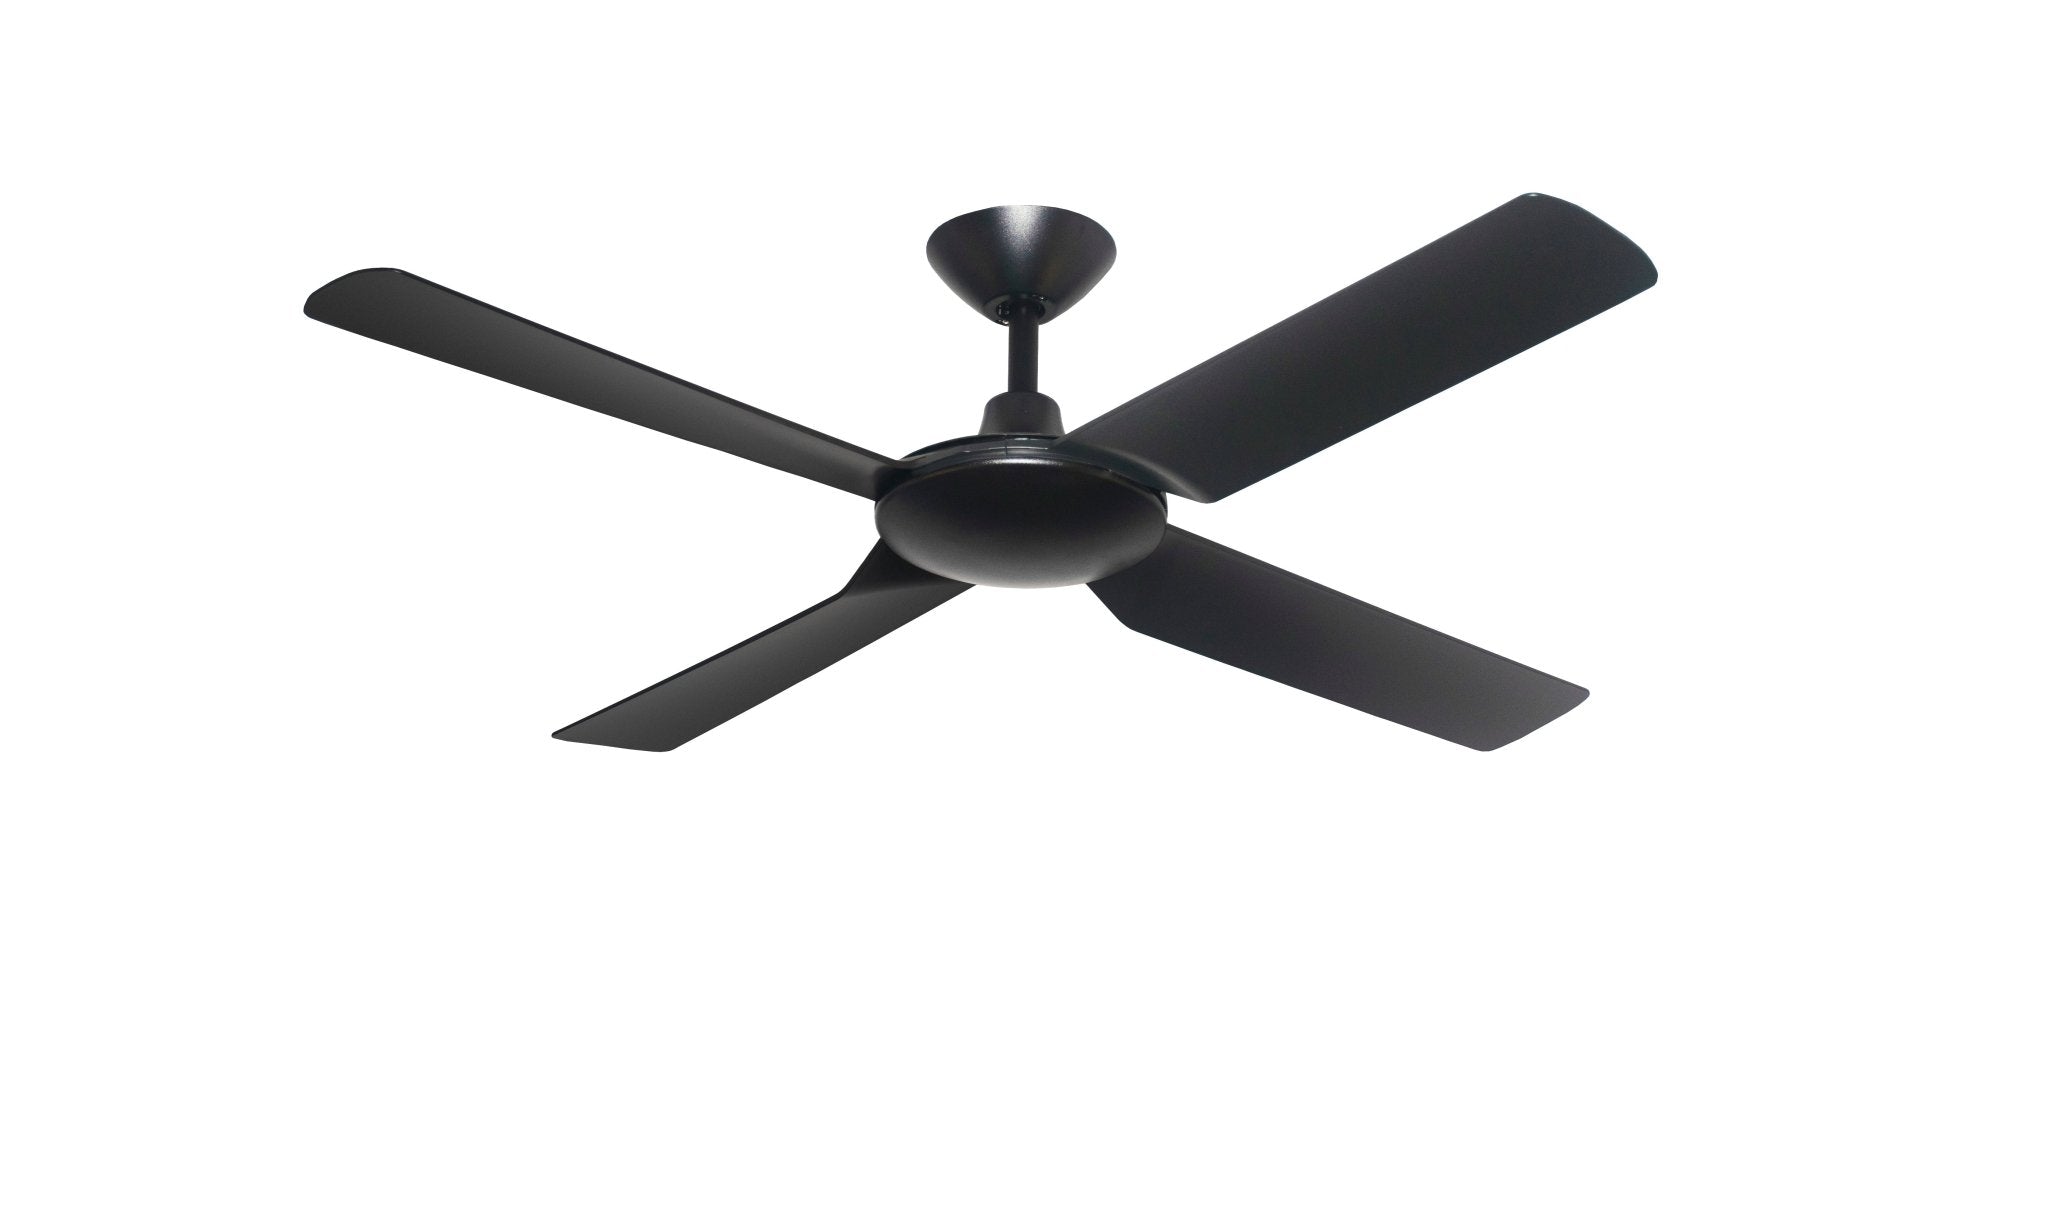 Next Creation V2 DC Ceiling Fan by Hunter Pacific in Black 52″ - Mases LightingHunter Pacific